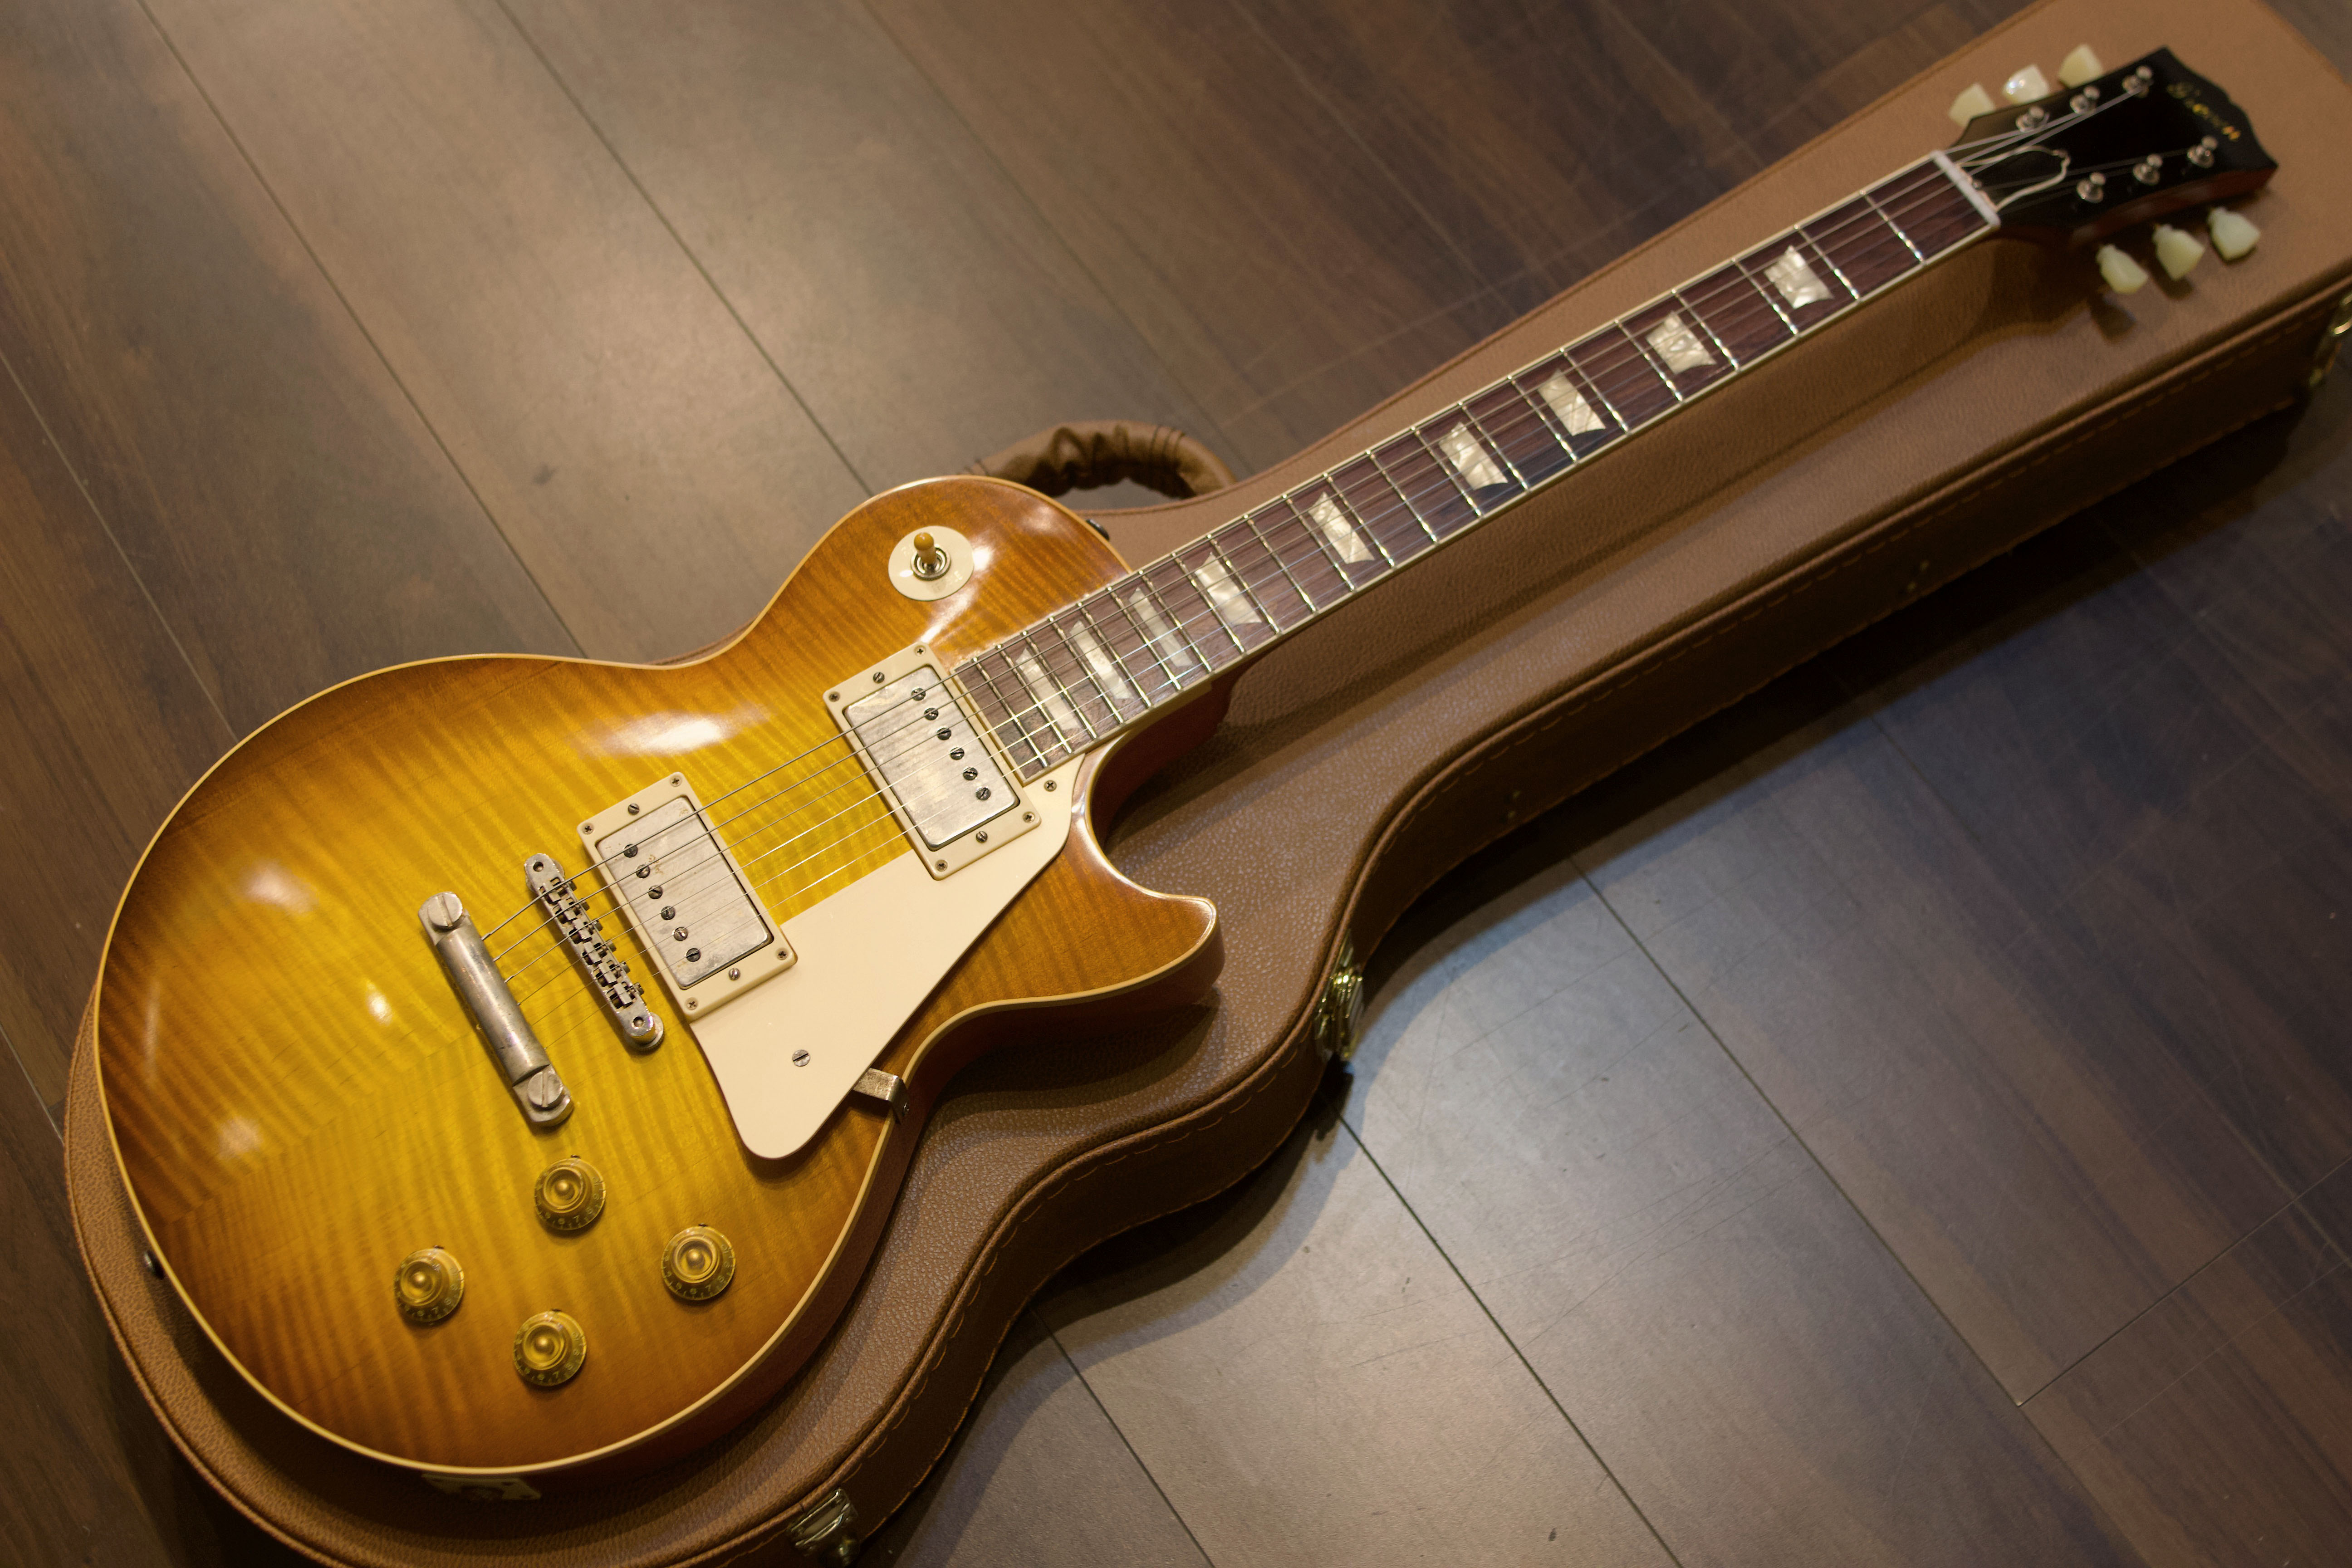 g7 Special g7-LPS Series9 4A Top "59 BURST"